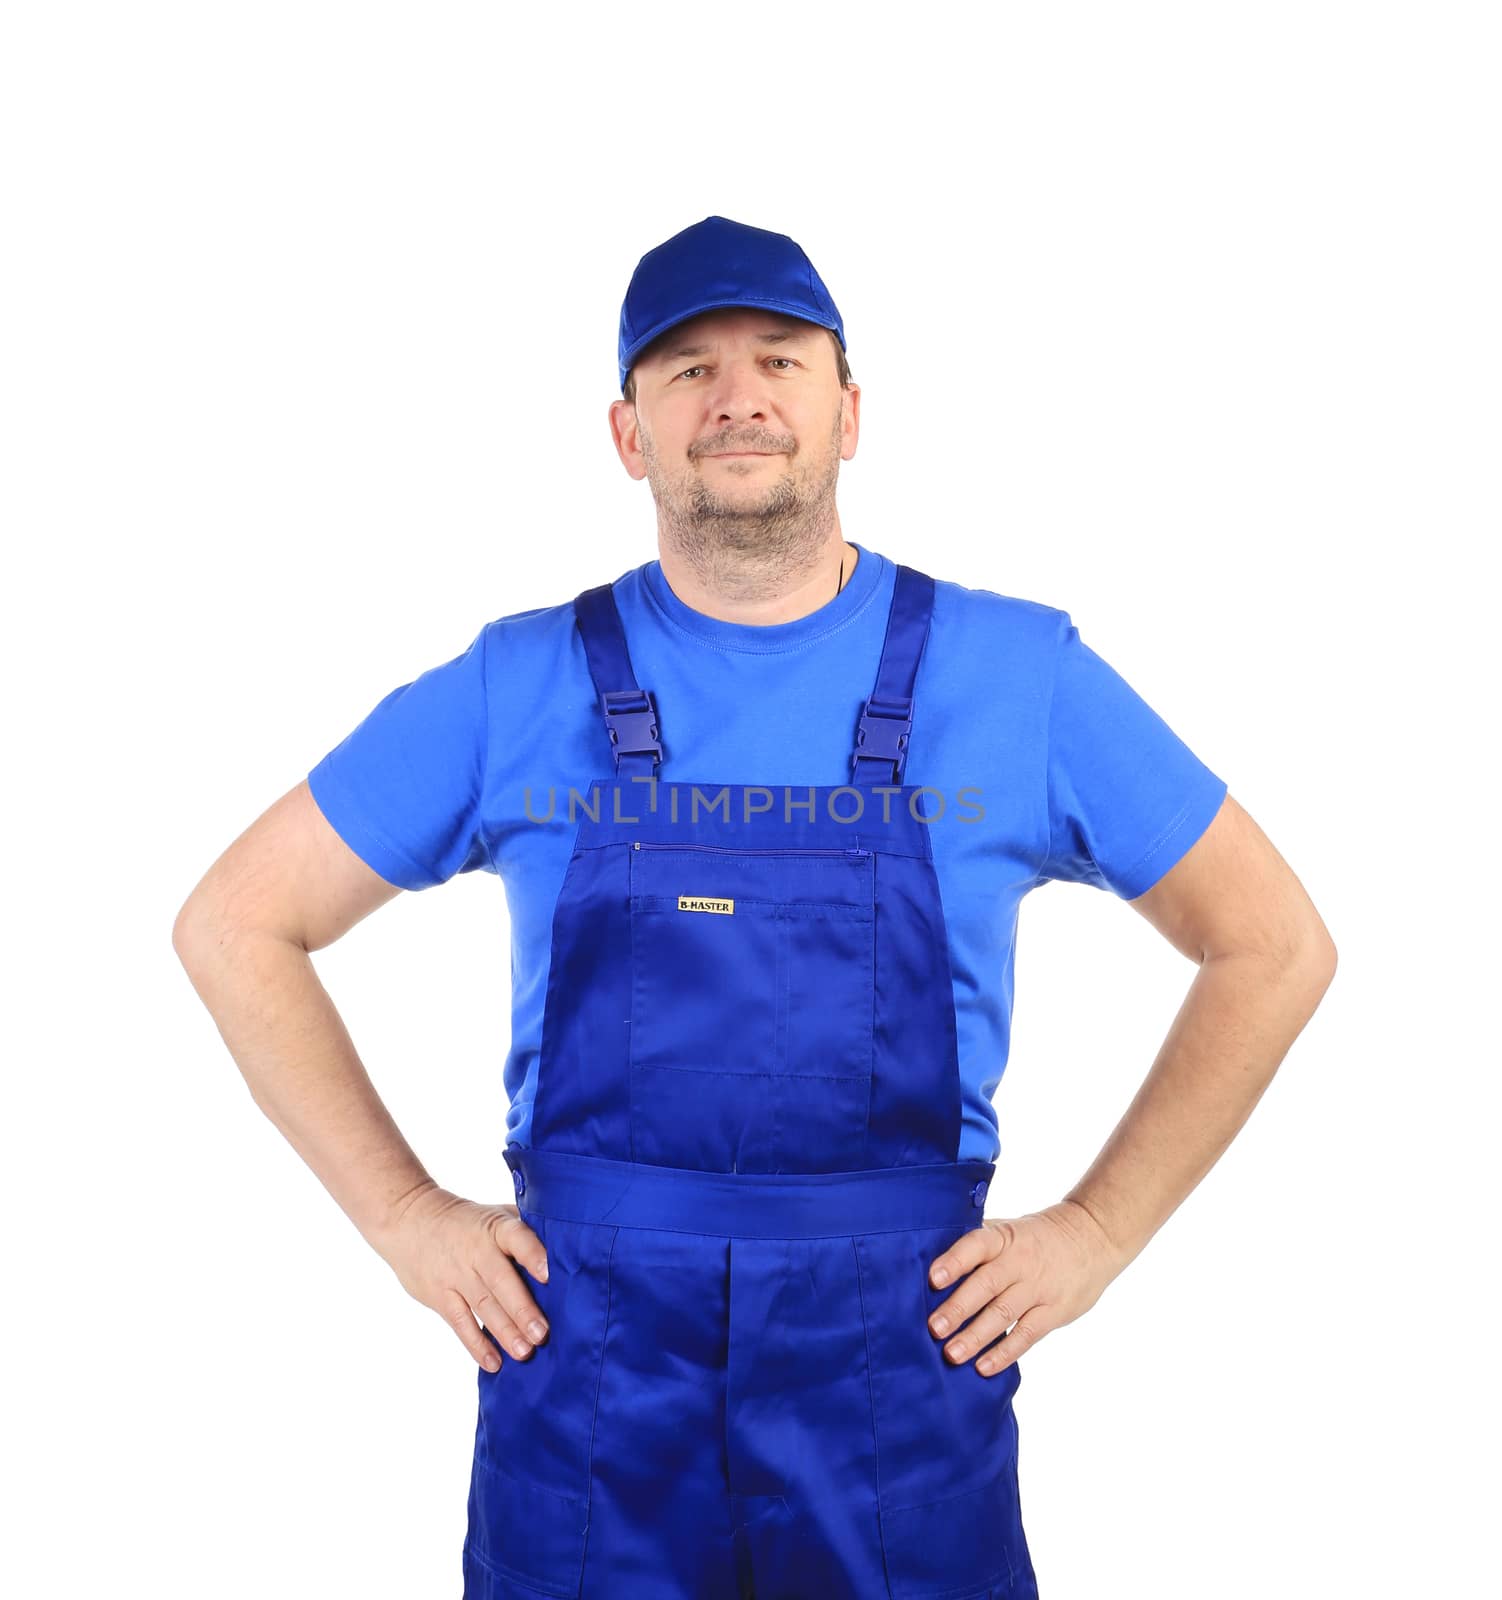 Worker with arms on waist. Isolated on a white background.